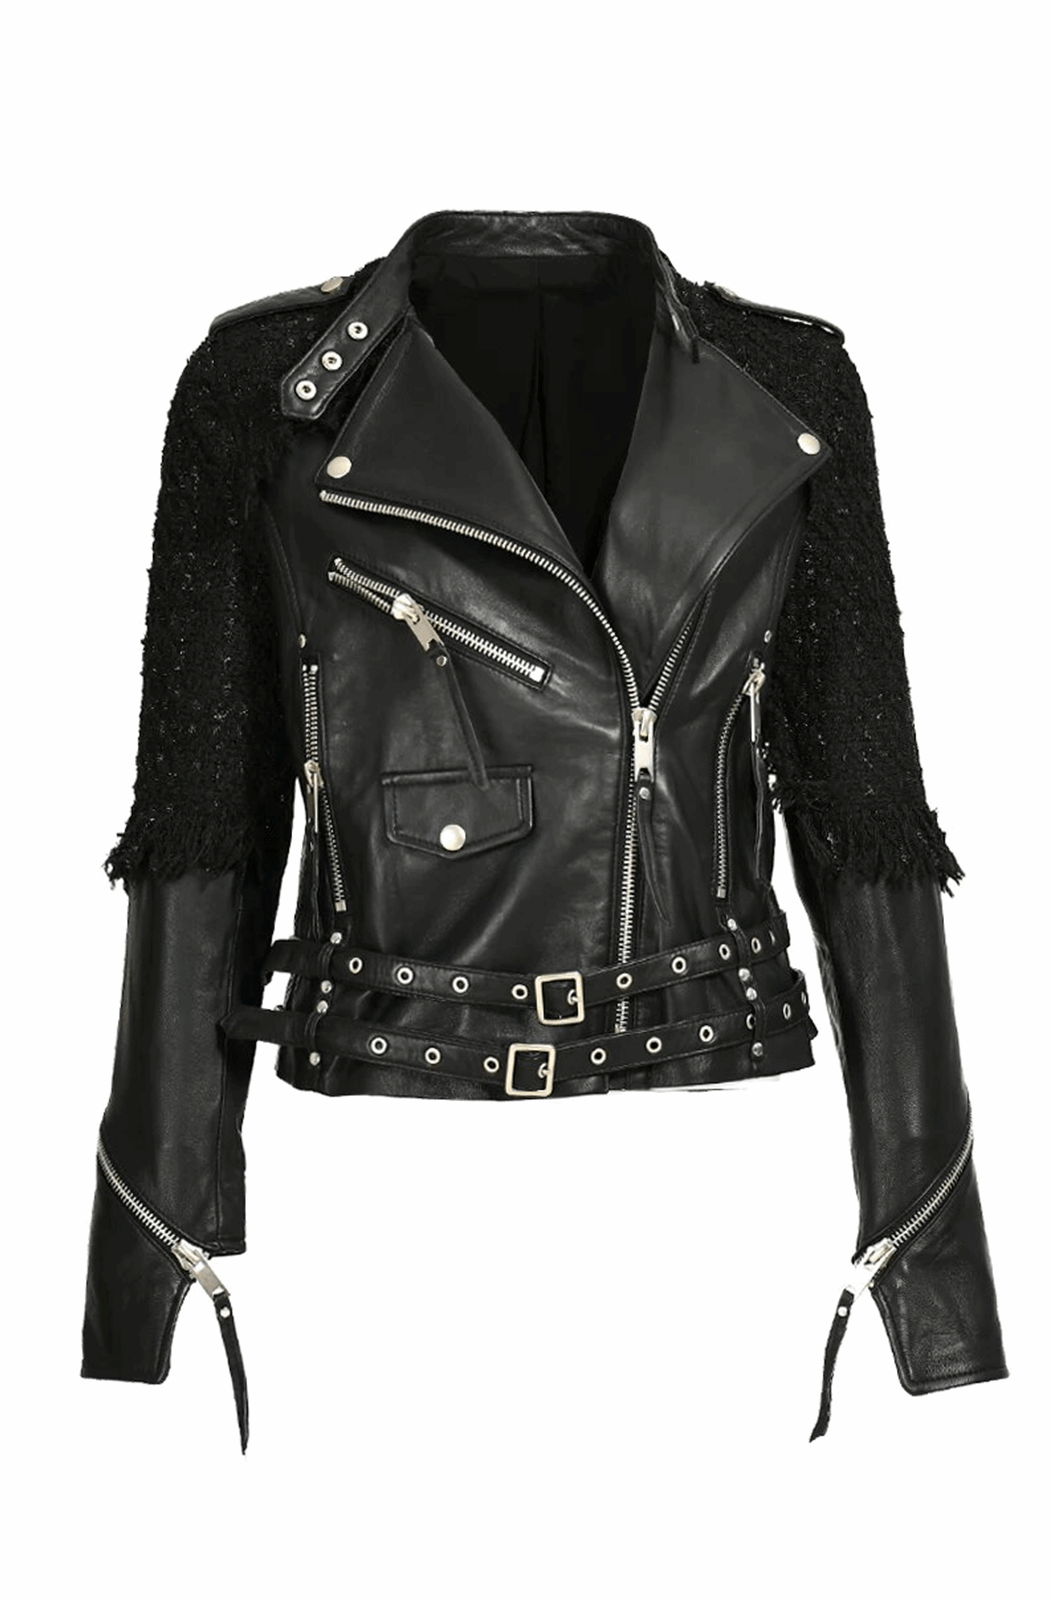 Real leather biker jacket with tweed patchwork